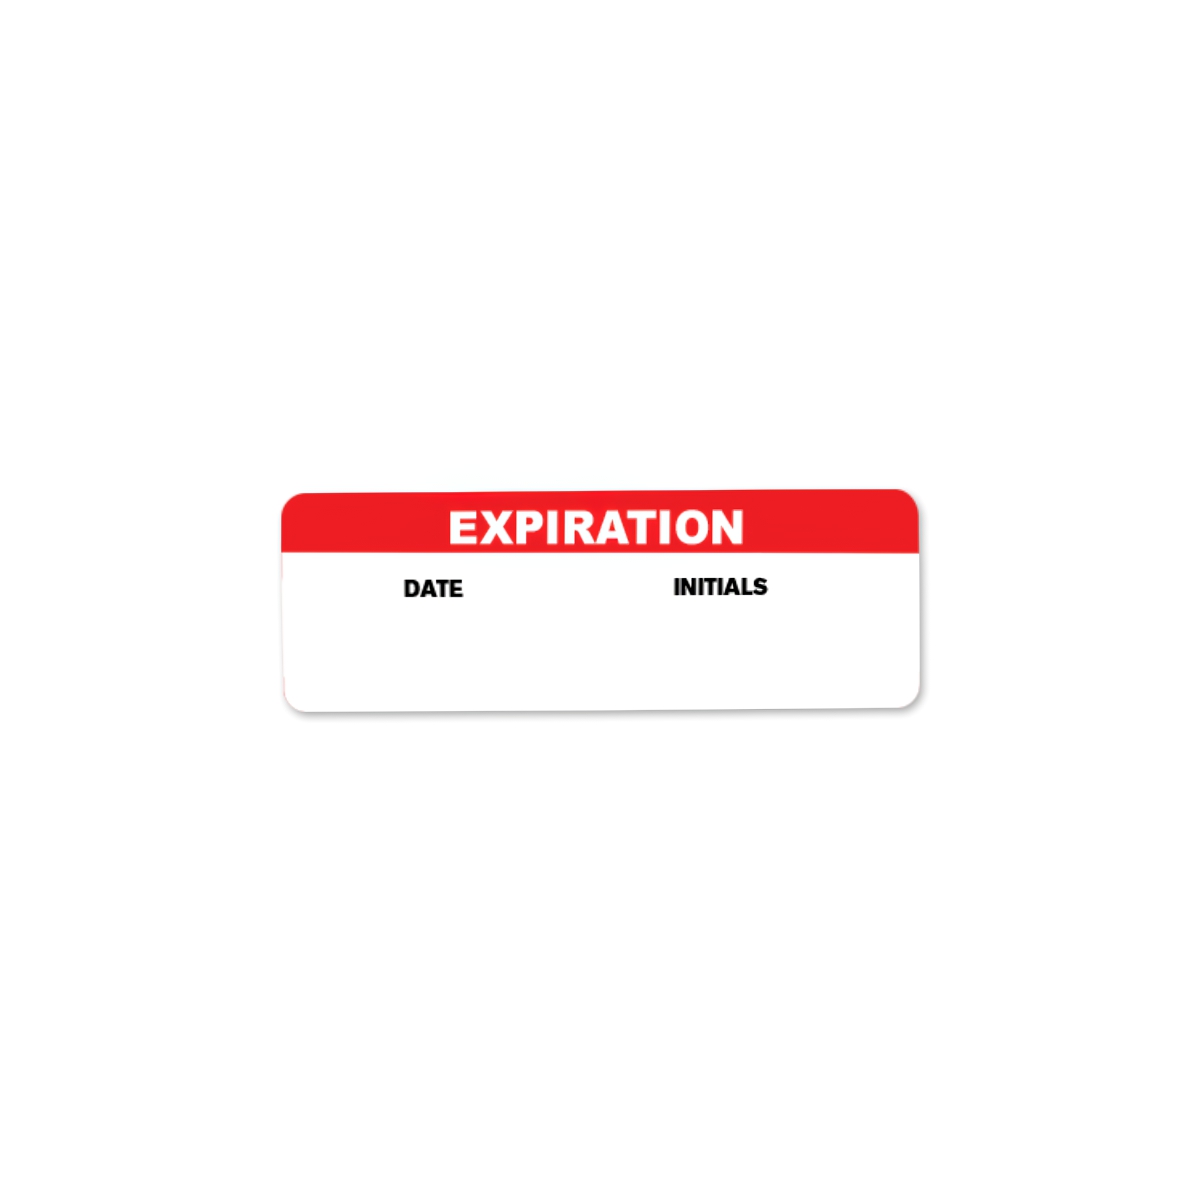 "Expiration" with "Date" & "Initials" Rectangular Water-Resistant Polypropylene Write-On Label - 3" x 1"